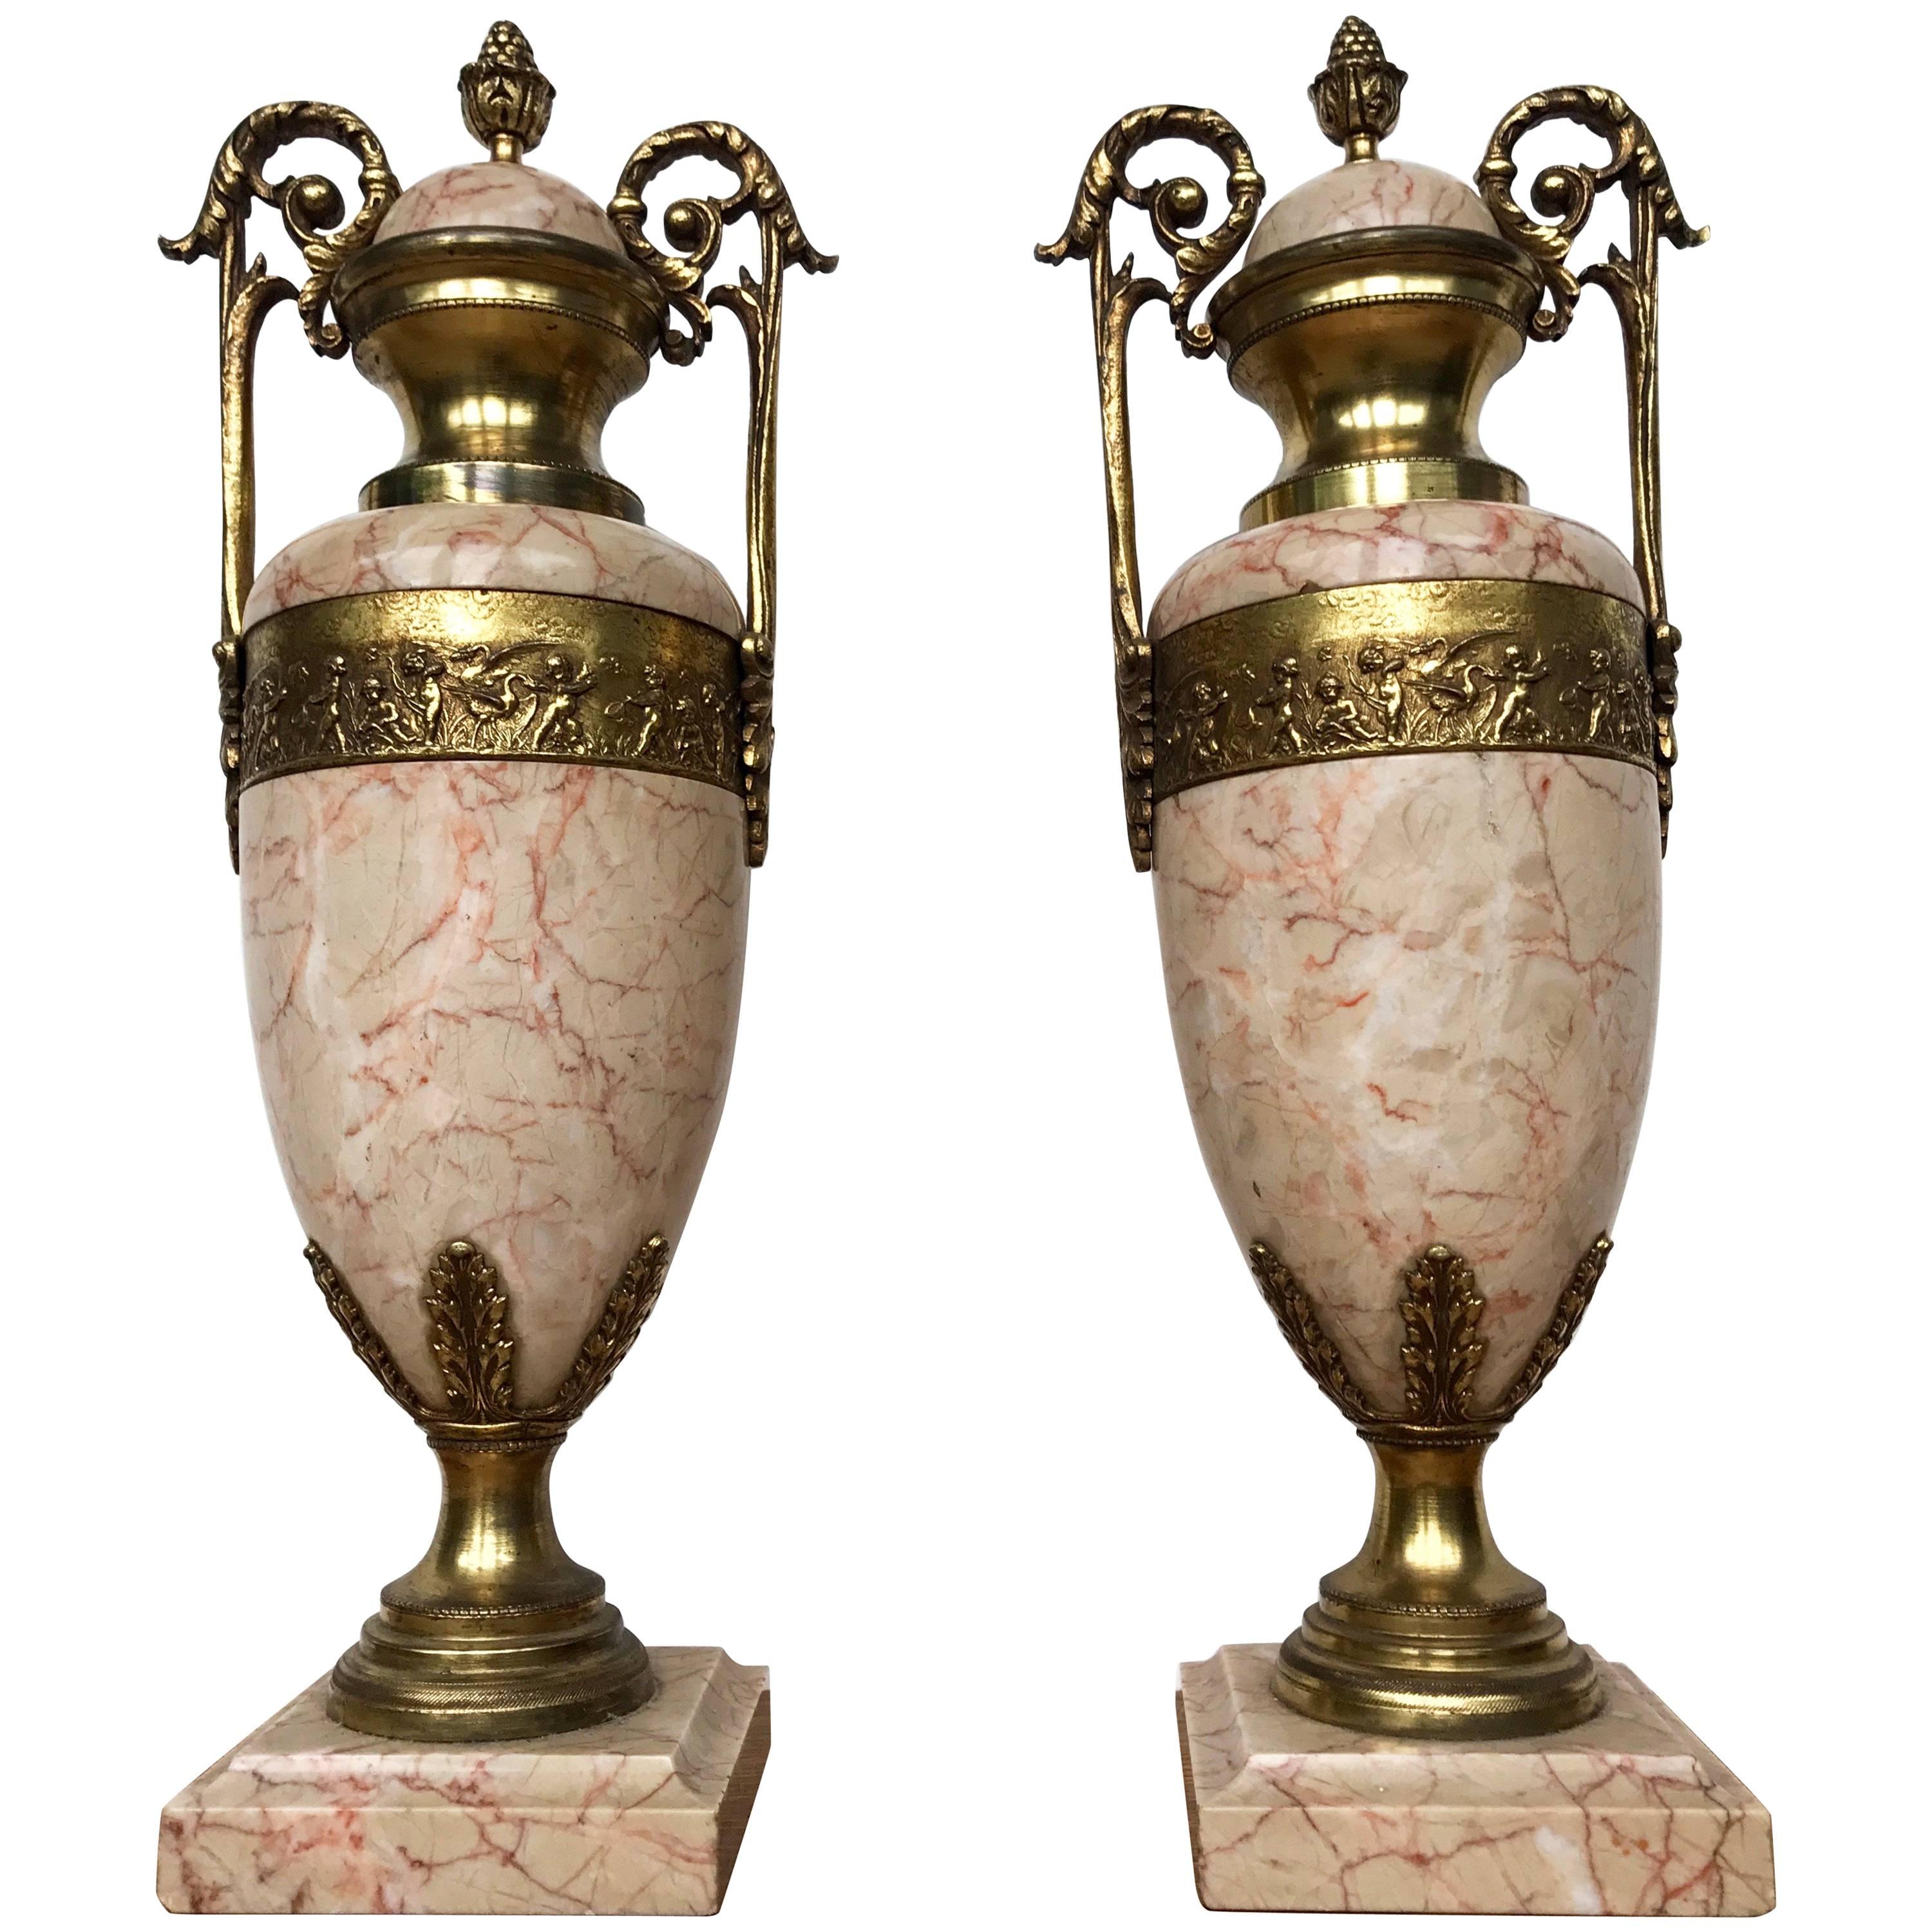 Pair of Antique French Gilt Bronze and Marble Cassolettes / Vases w. Putti Decor